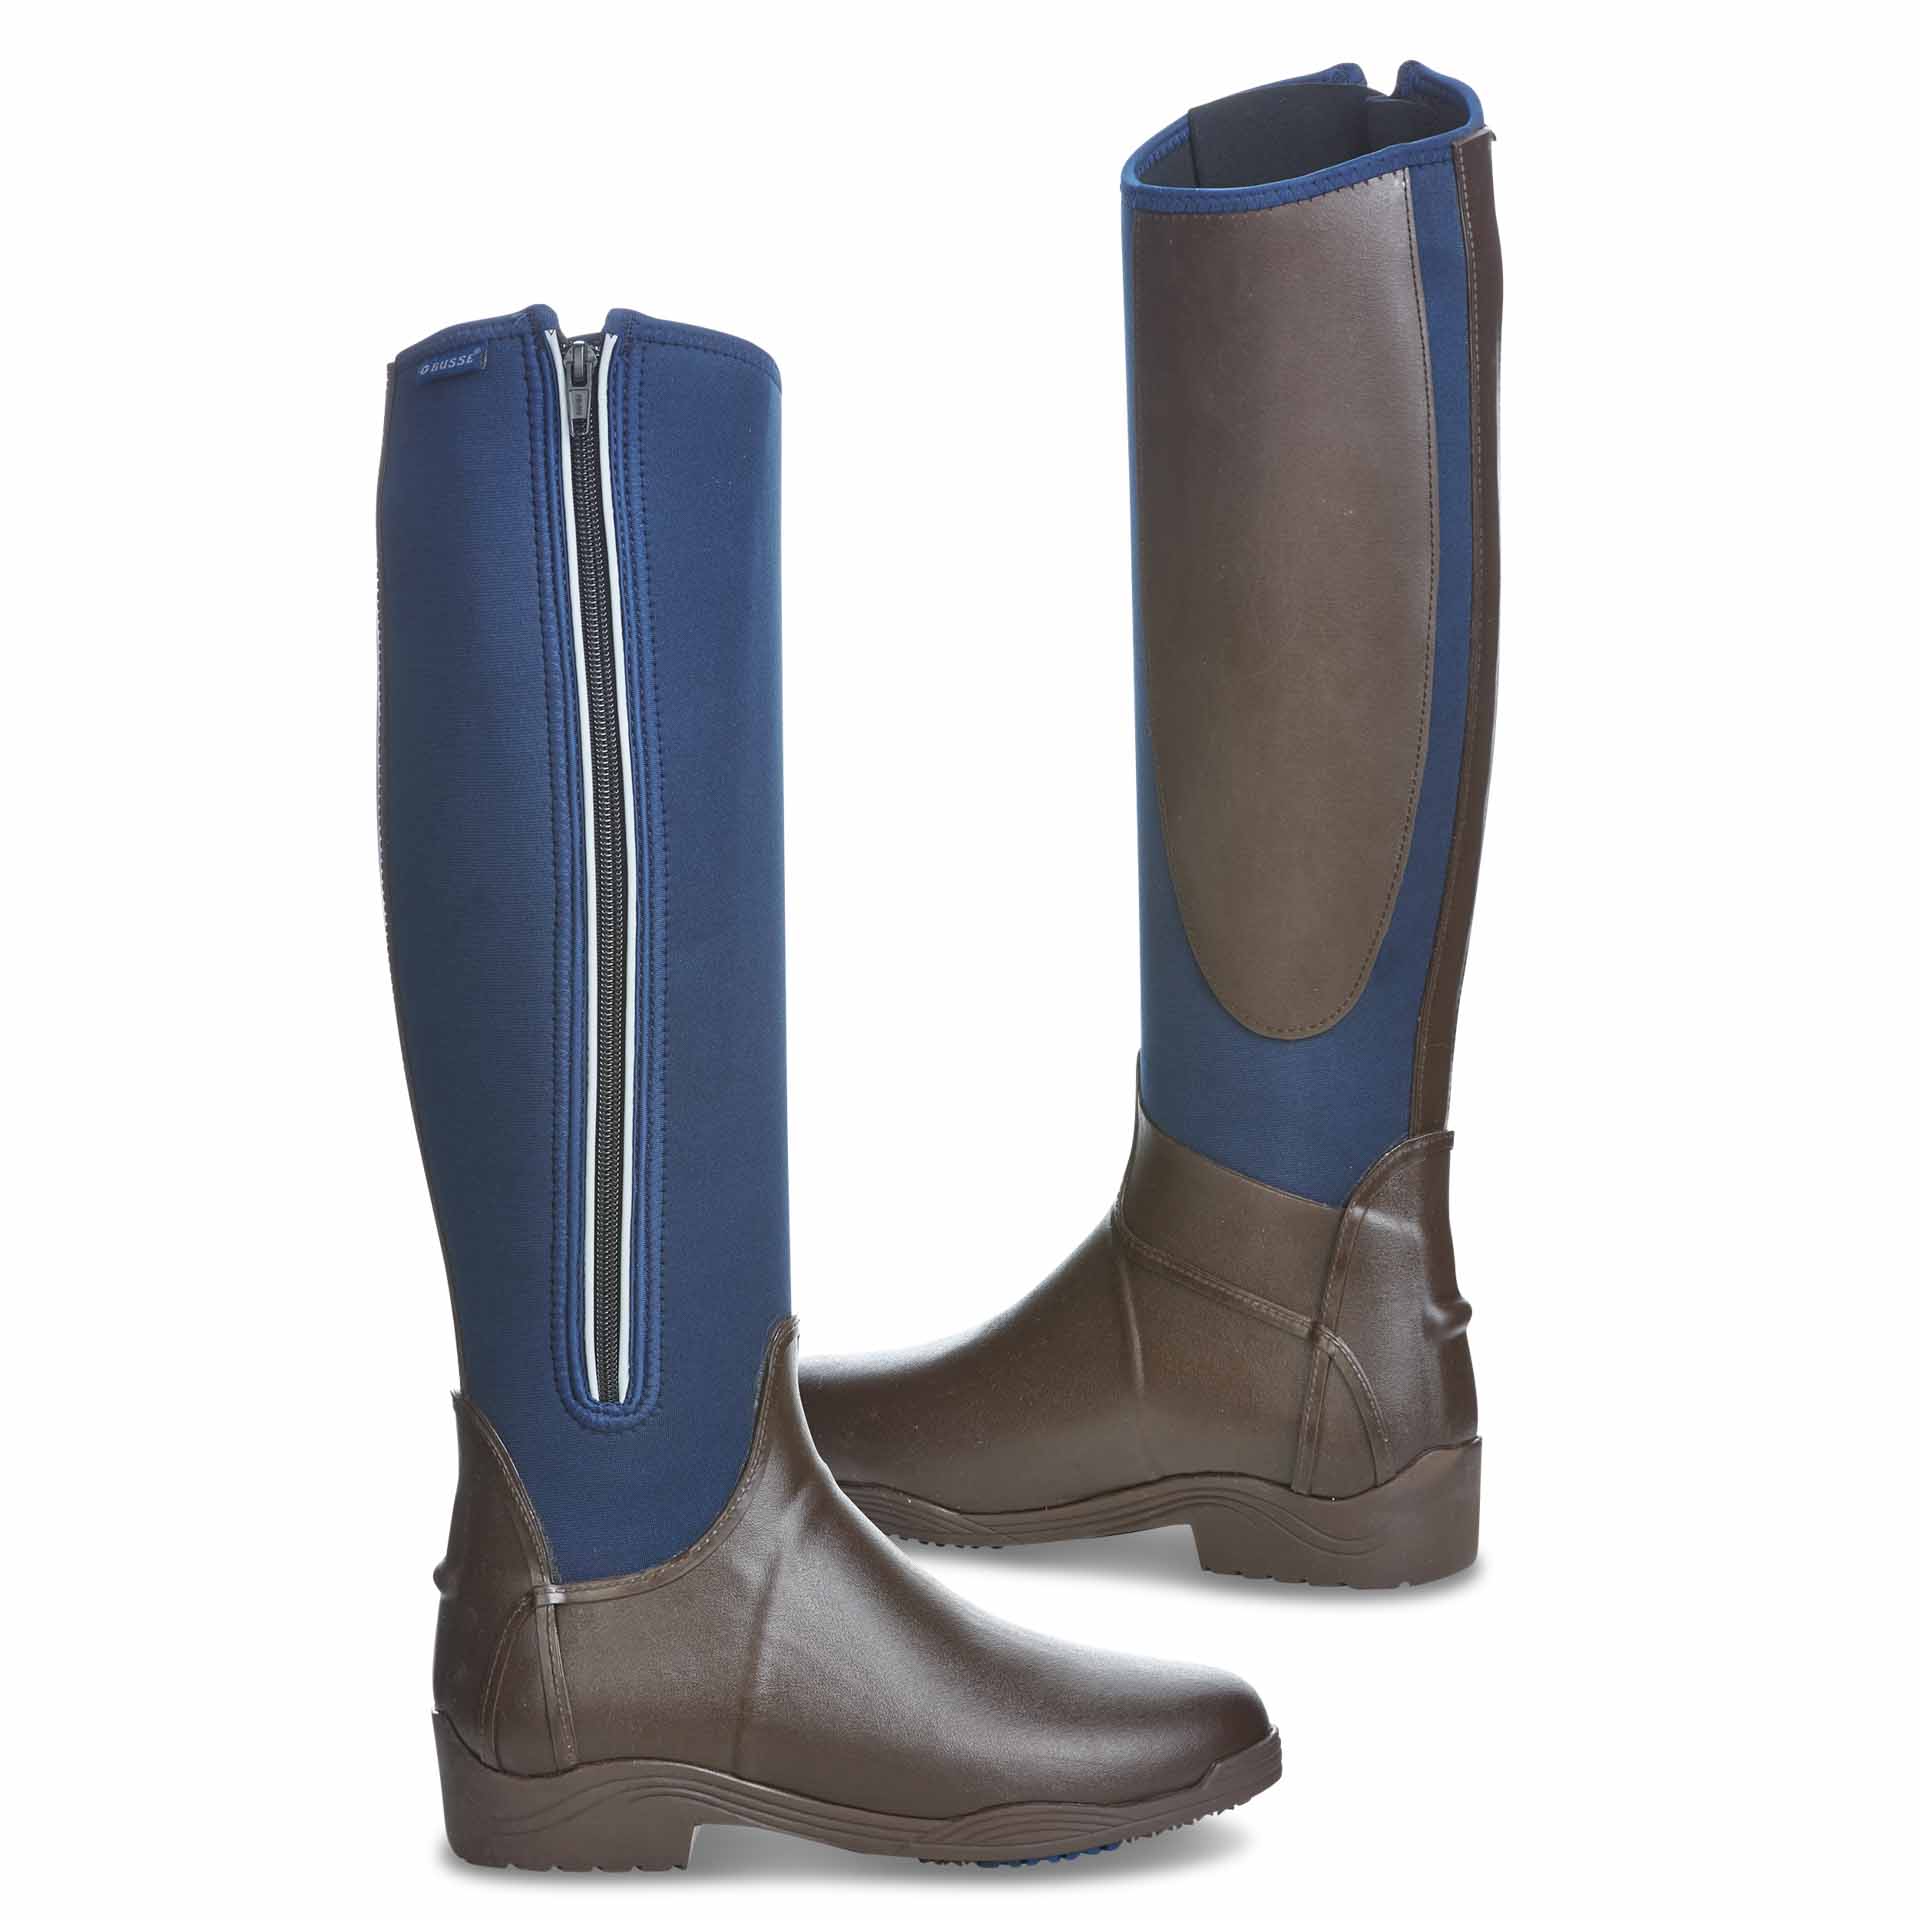 BUSSE Riding Mud Boots CALGARY, brown/navy 40 nn